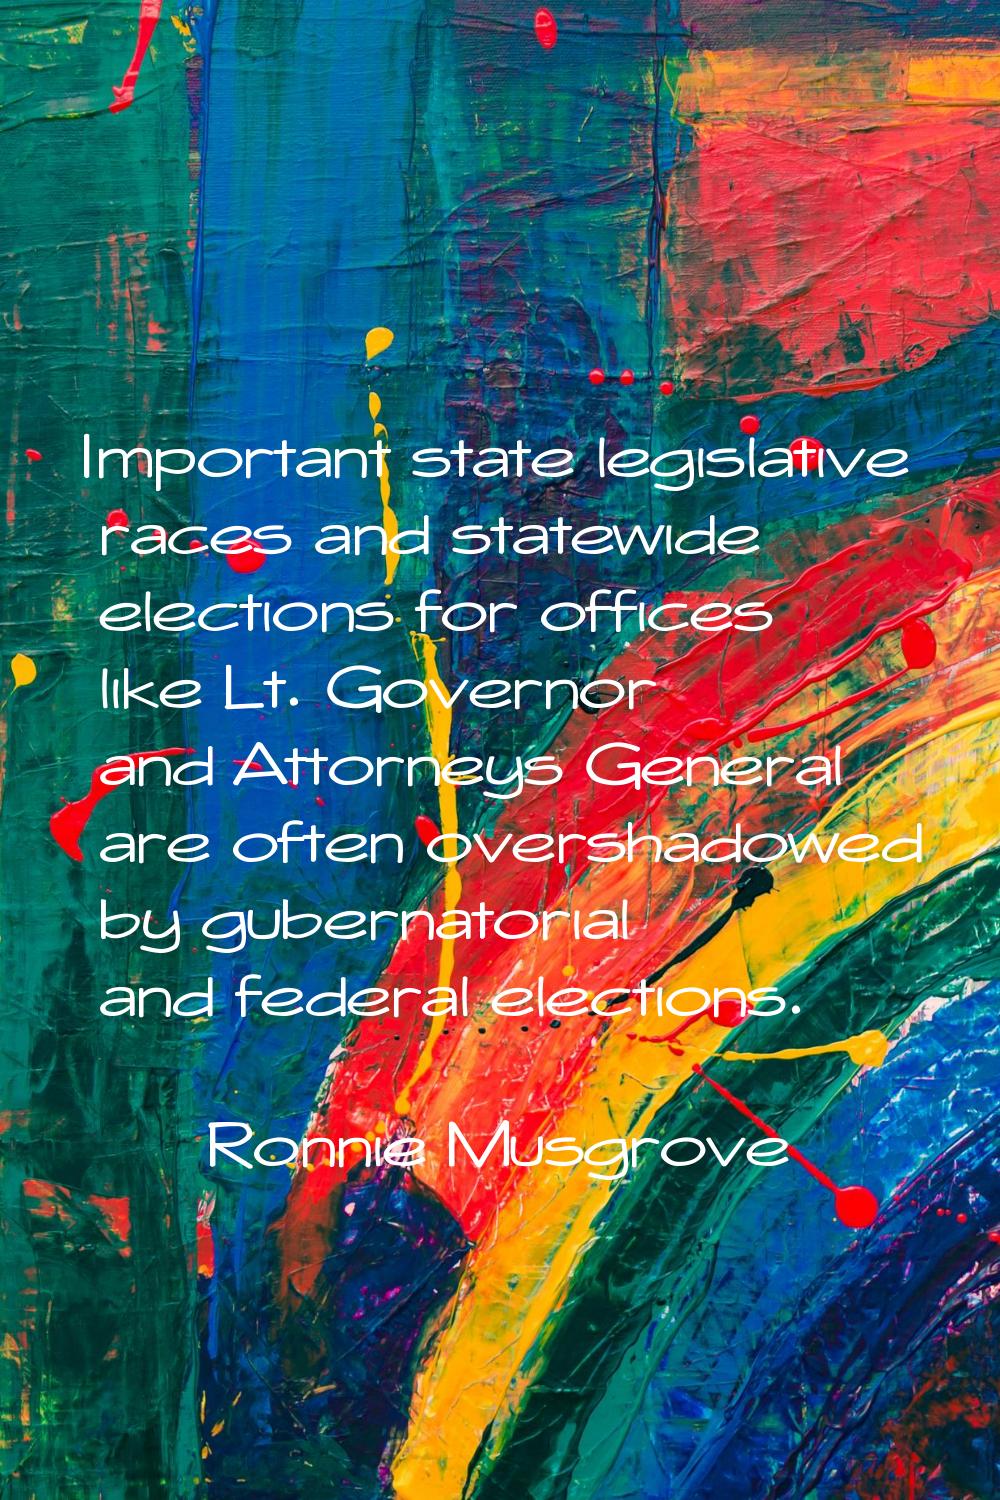 Important state legislative races and statewide elections for offices like Lt. Governor and Attorne